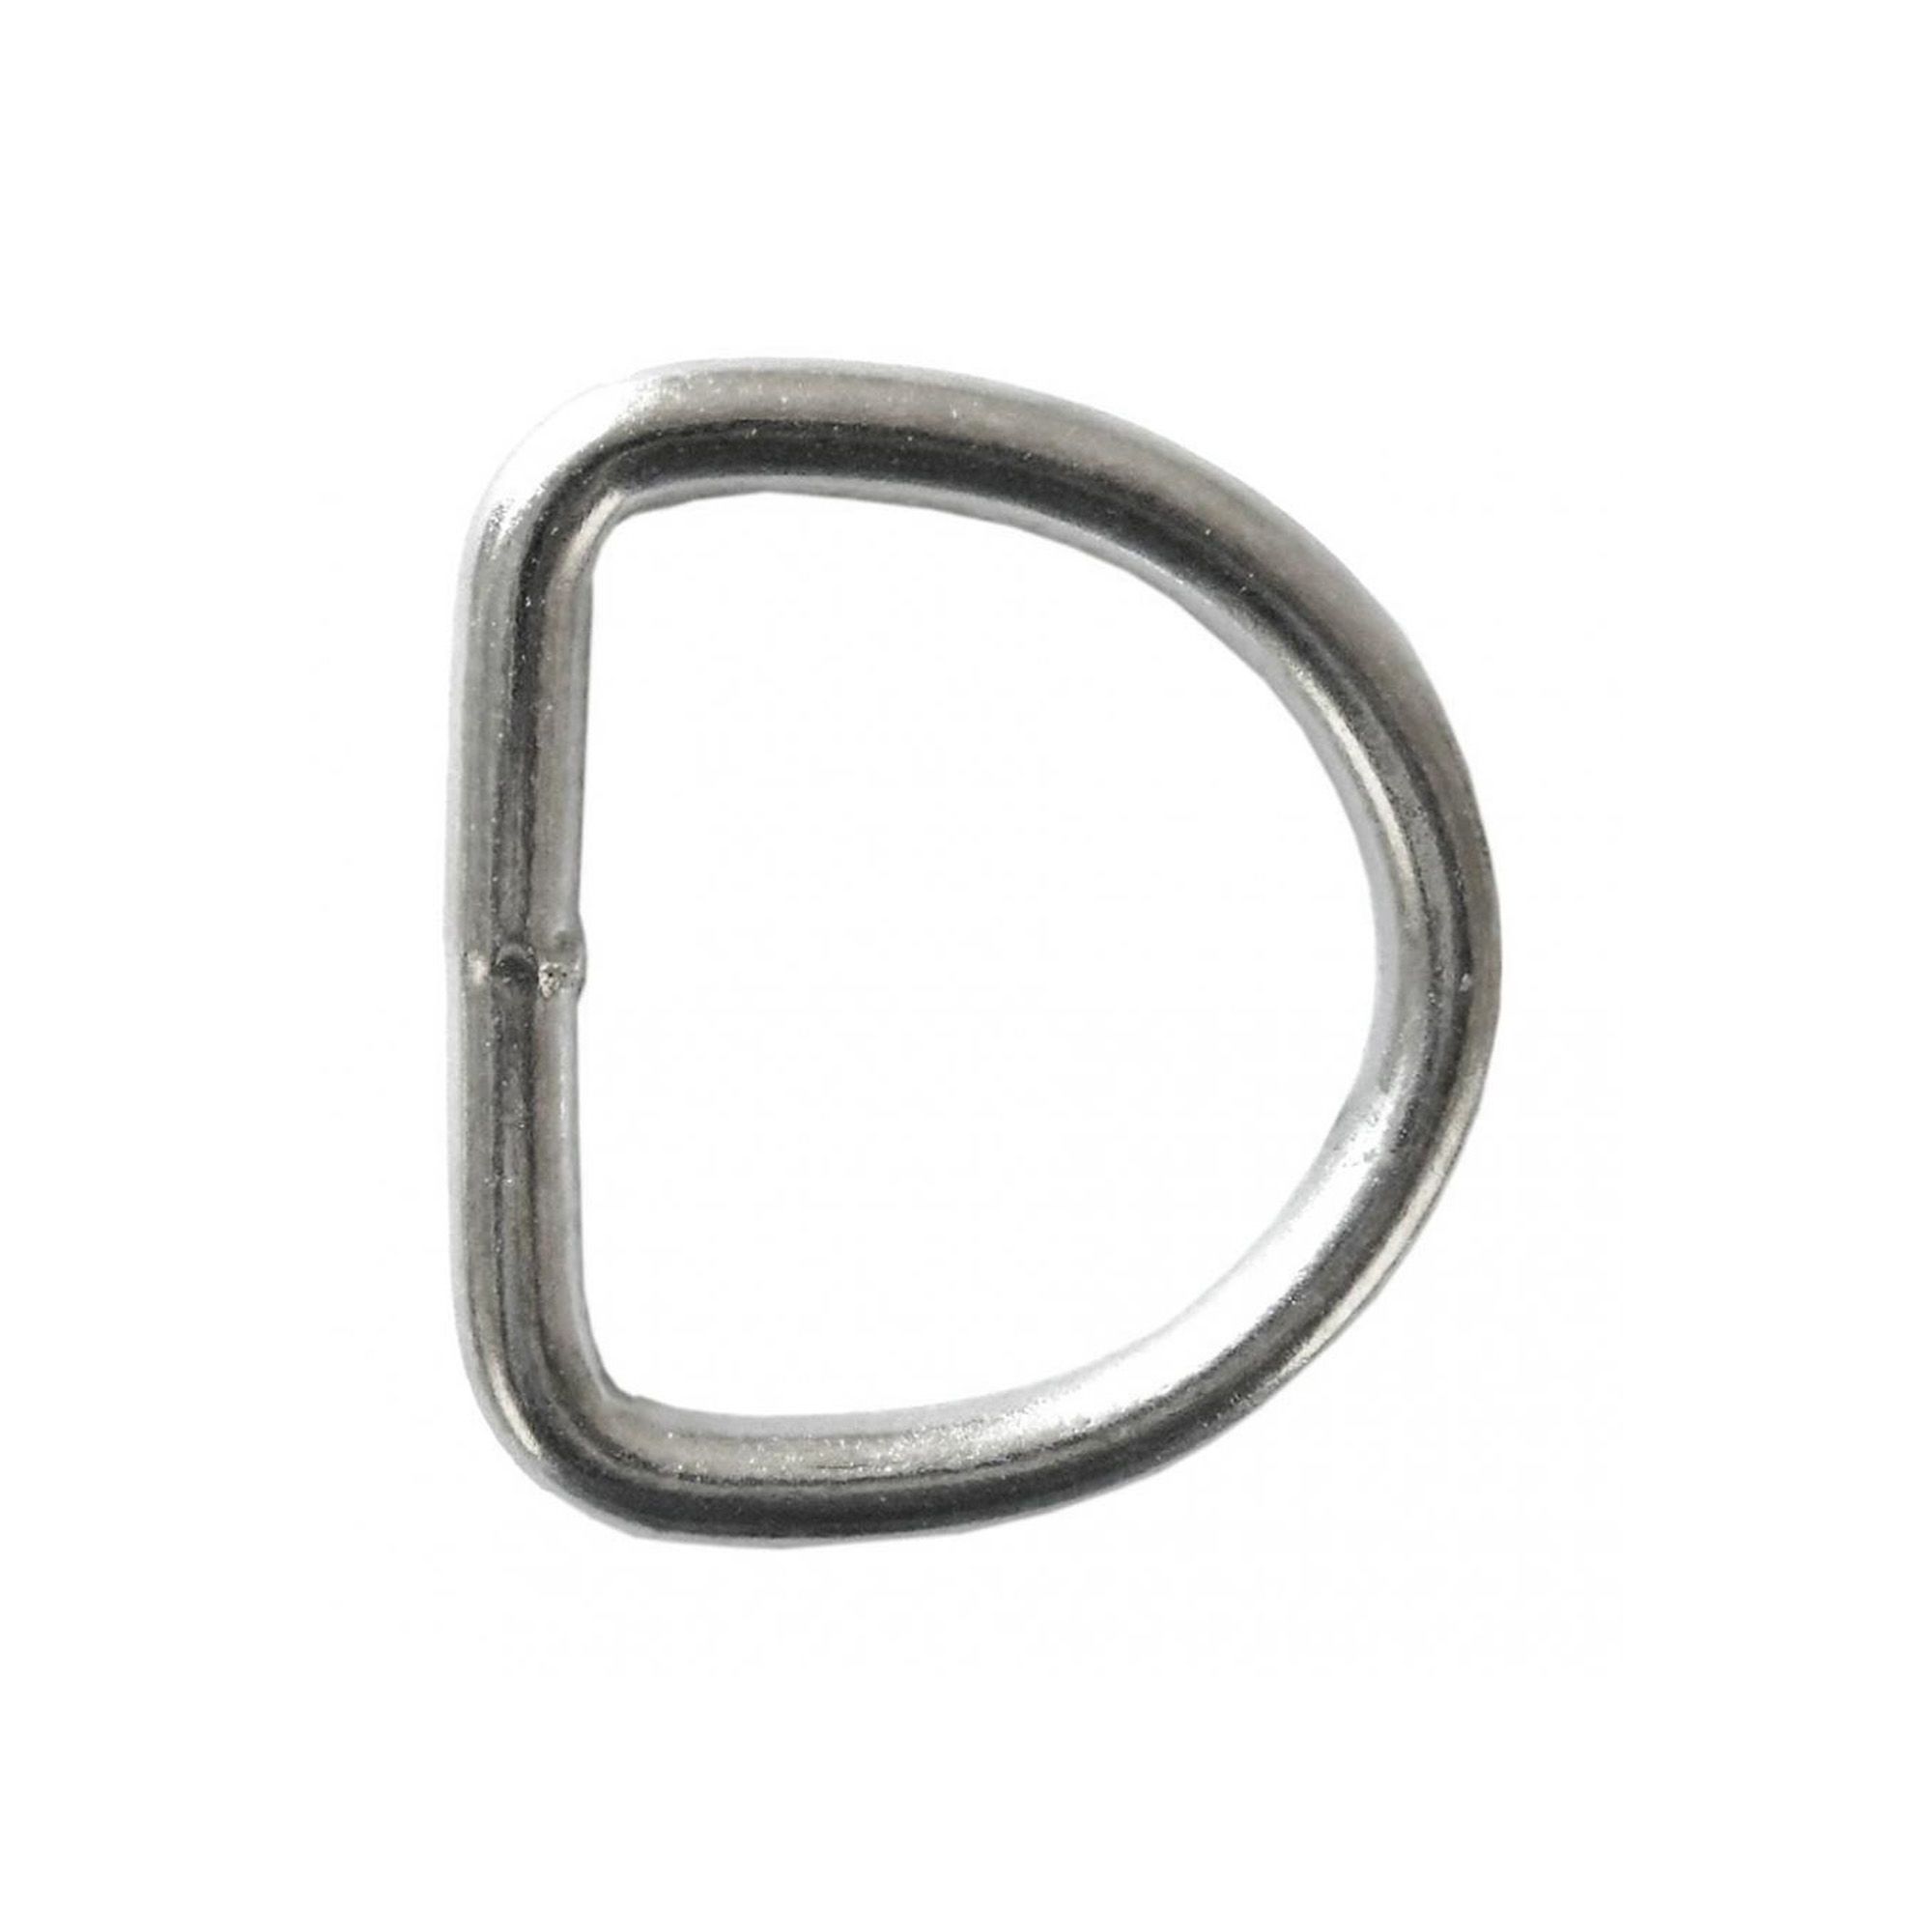 Heavy duty D-ring - 2 x 1 3/4 - Pack of 10